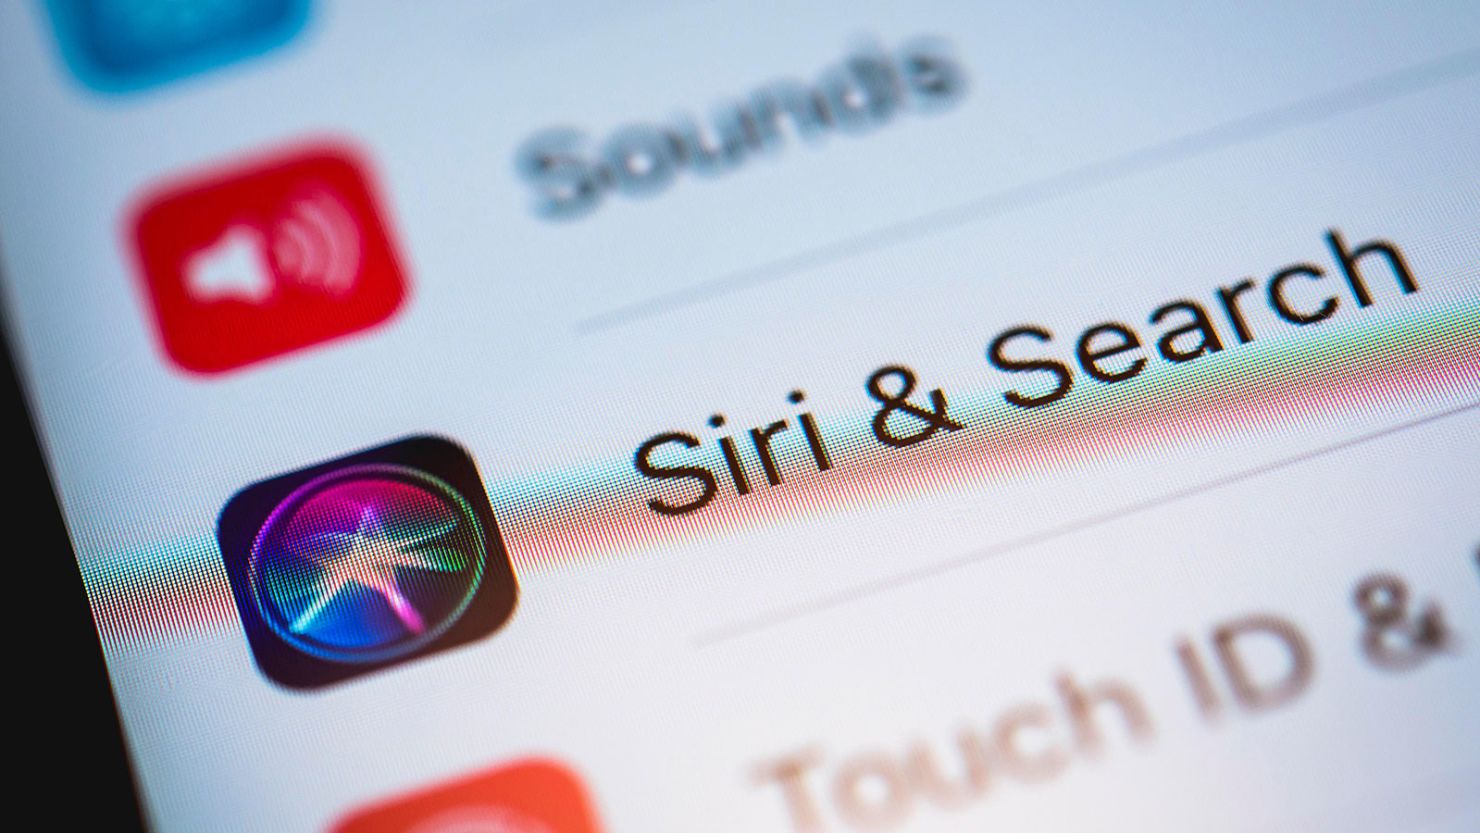 An iPhone chatbot? Siri could get a big boost with the help of artificial intelligence